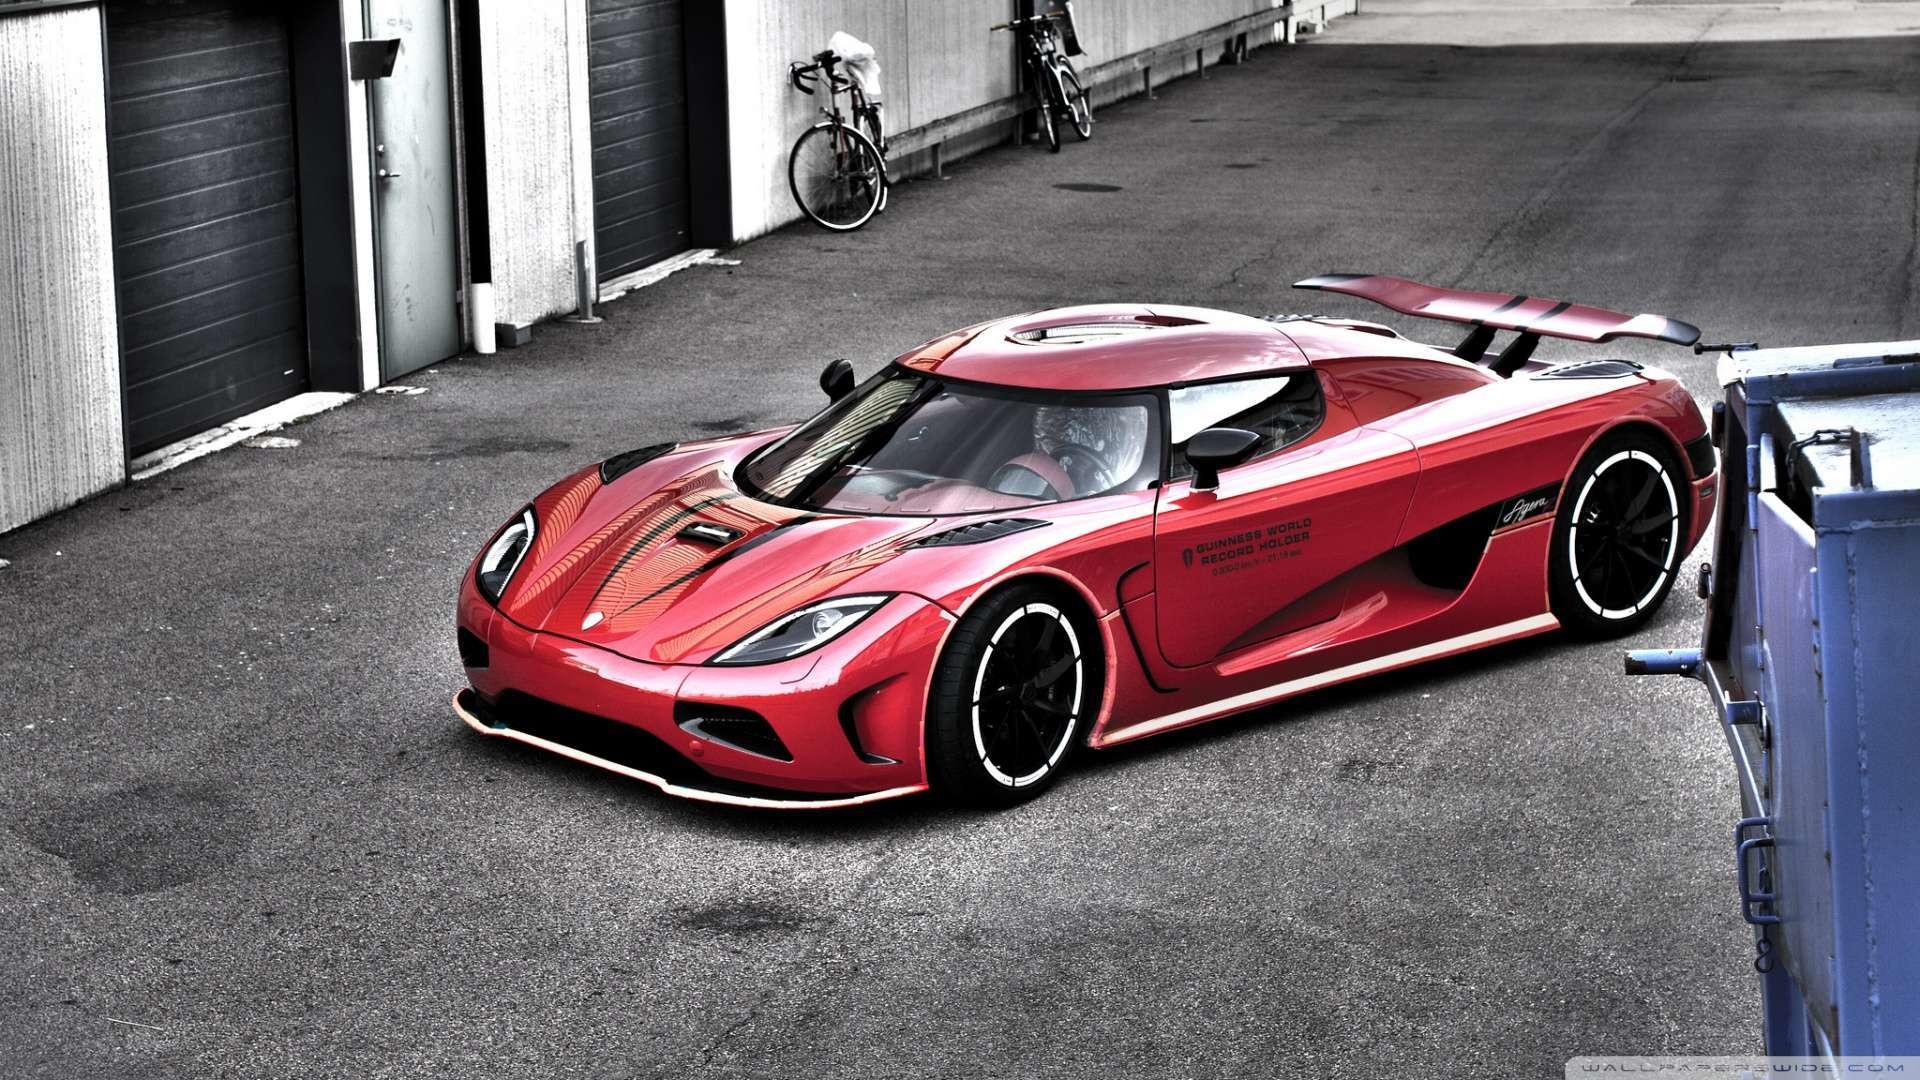 1920x1080 red koenigsegg hdr wallpaper 1080p hd Car Pictures 